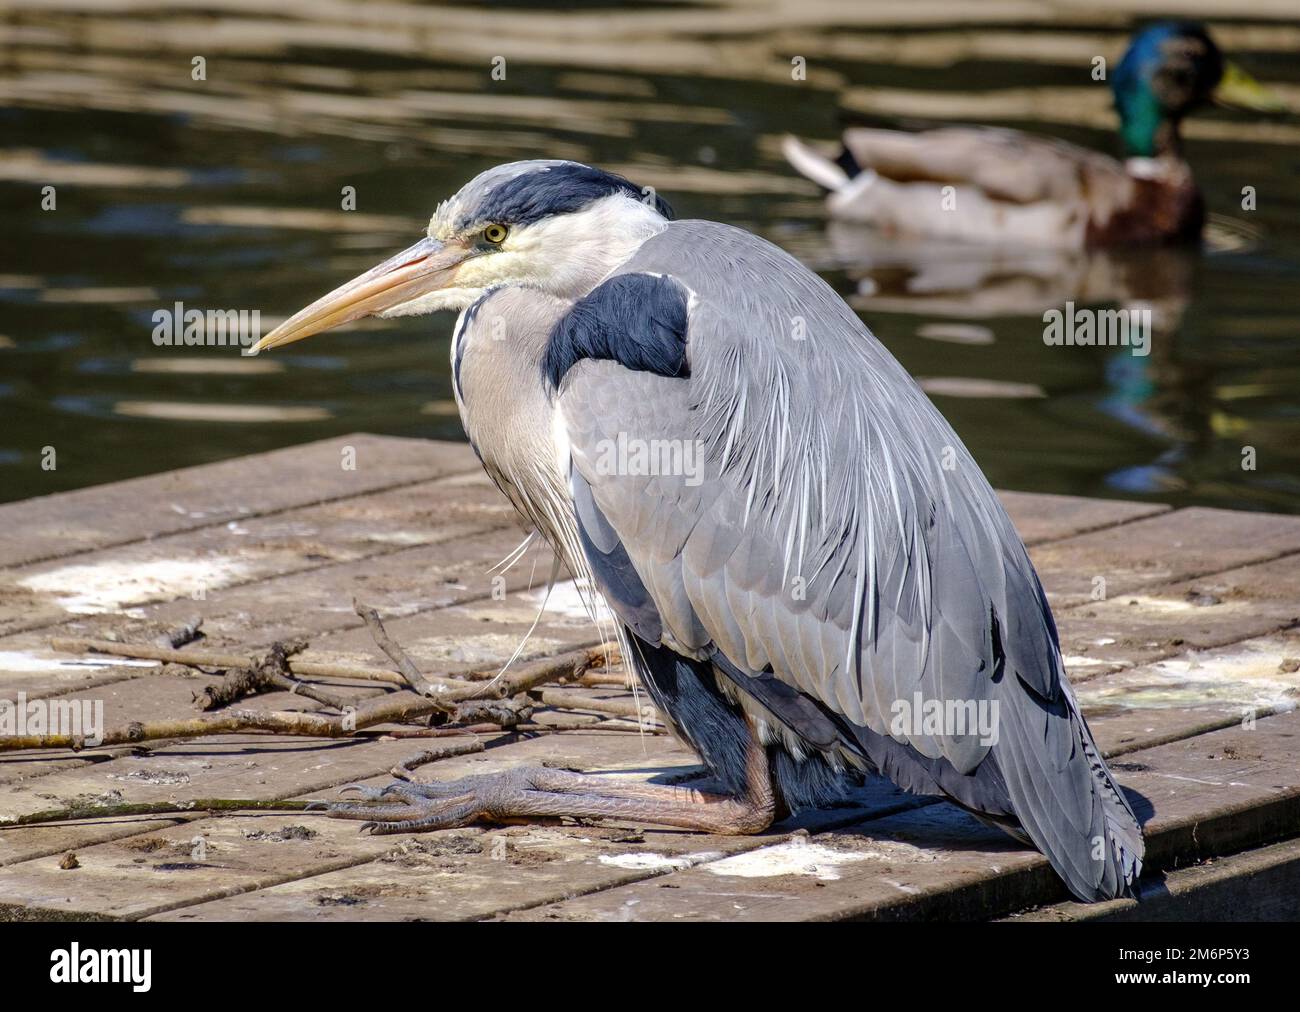 Close-up of Adult grey heron with retracted neck and long sharply pointed beak sitting on raft in lake looking for prey. Stock Photo